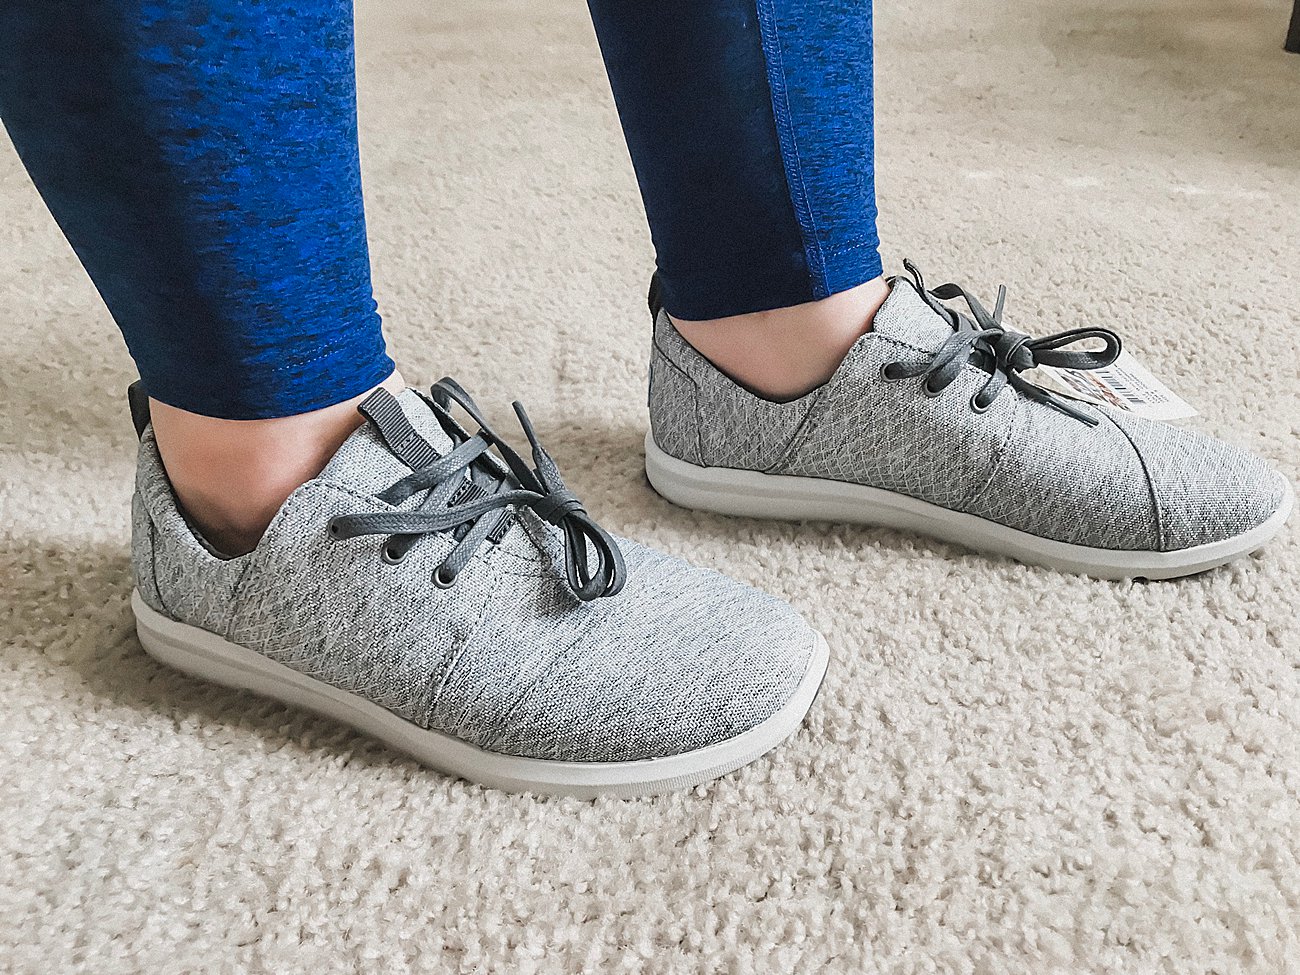 TOMS - Del Rey Canvas Lace-Up Sneakers - SIZE: 8 - $79 - Athleisure & Activewear Stitch Fix Review (1)